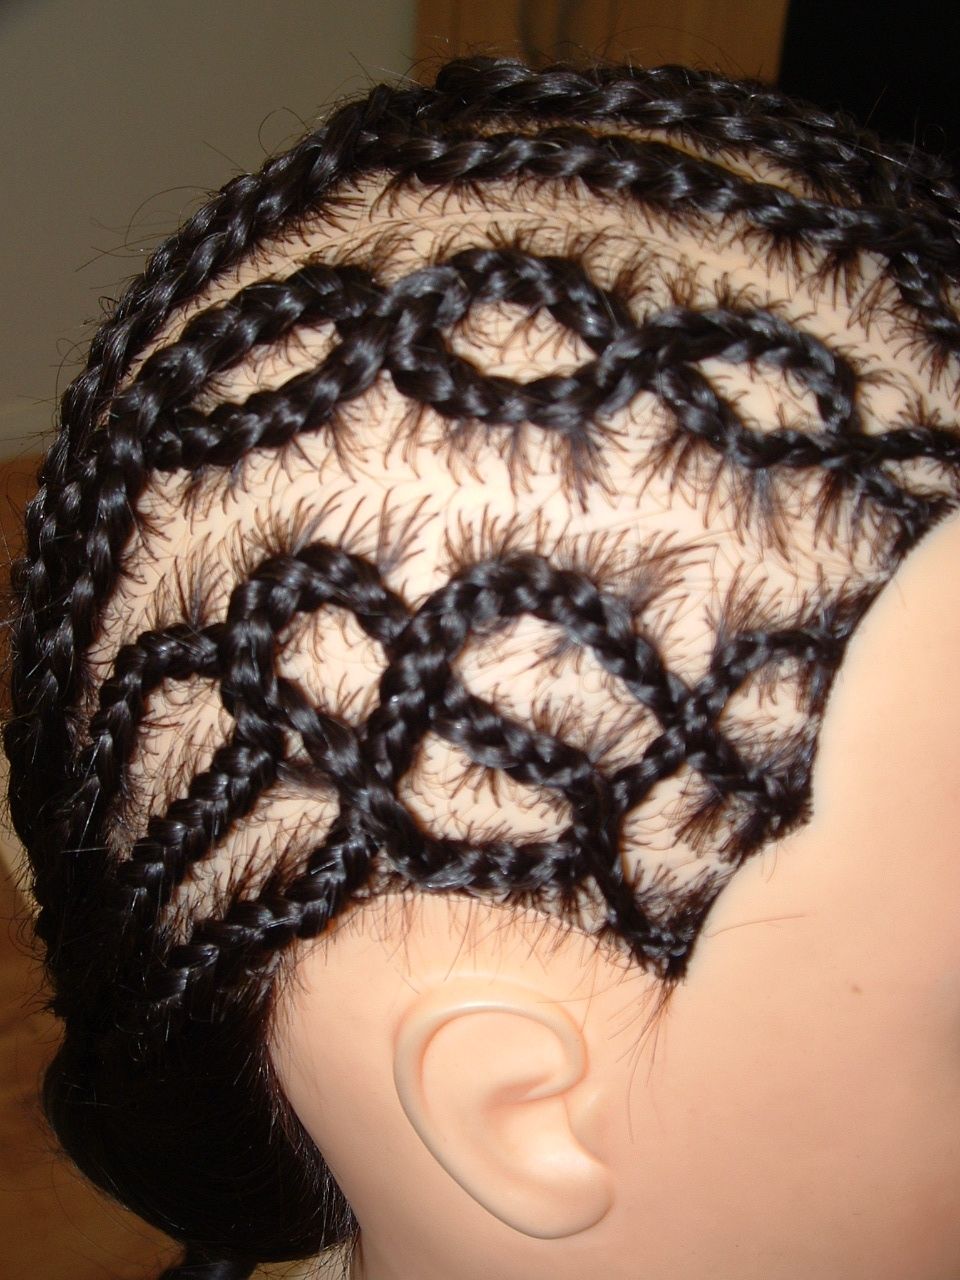 Foundation To Professional Hair Braiding And Extensions Training Inside Latest Criss Crossed Braids With Feed In Cornrows (View 12 of 15)